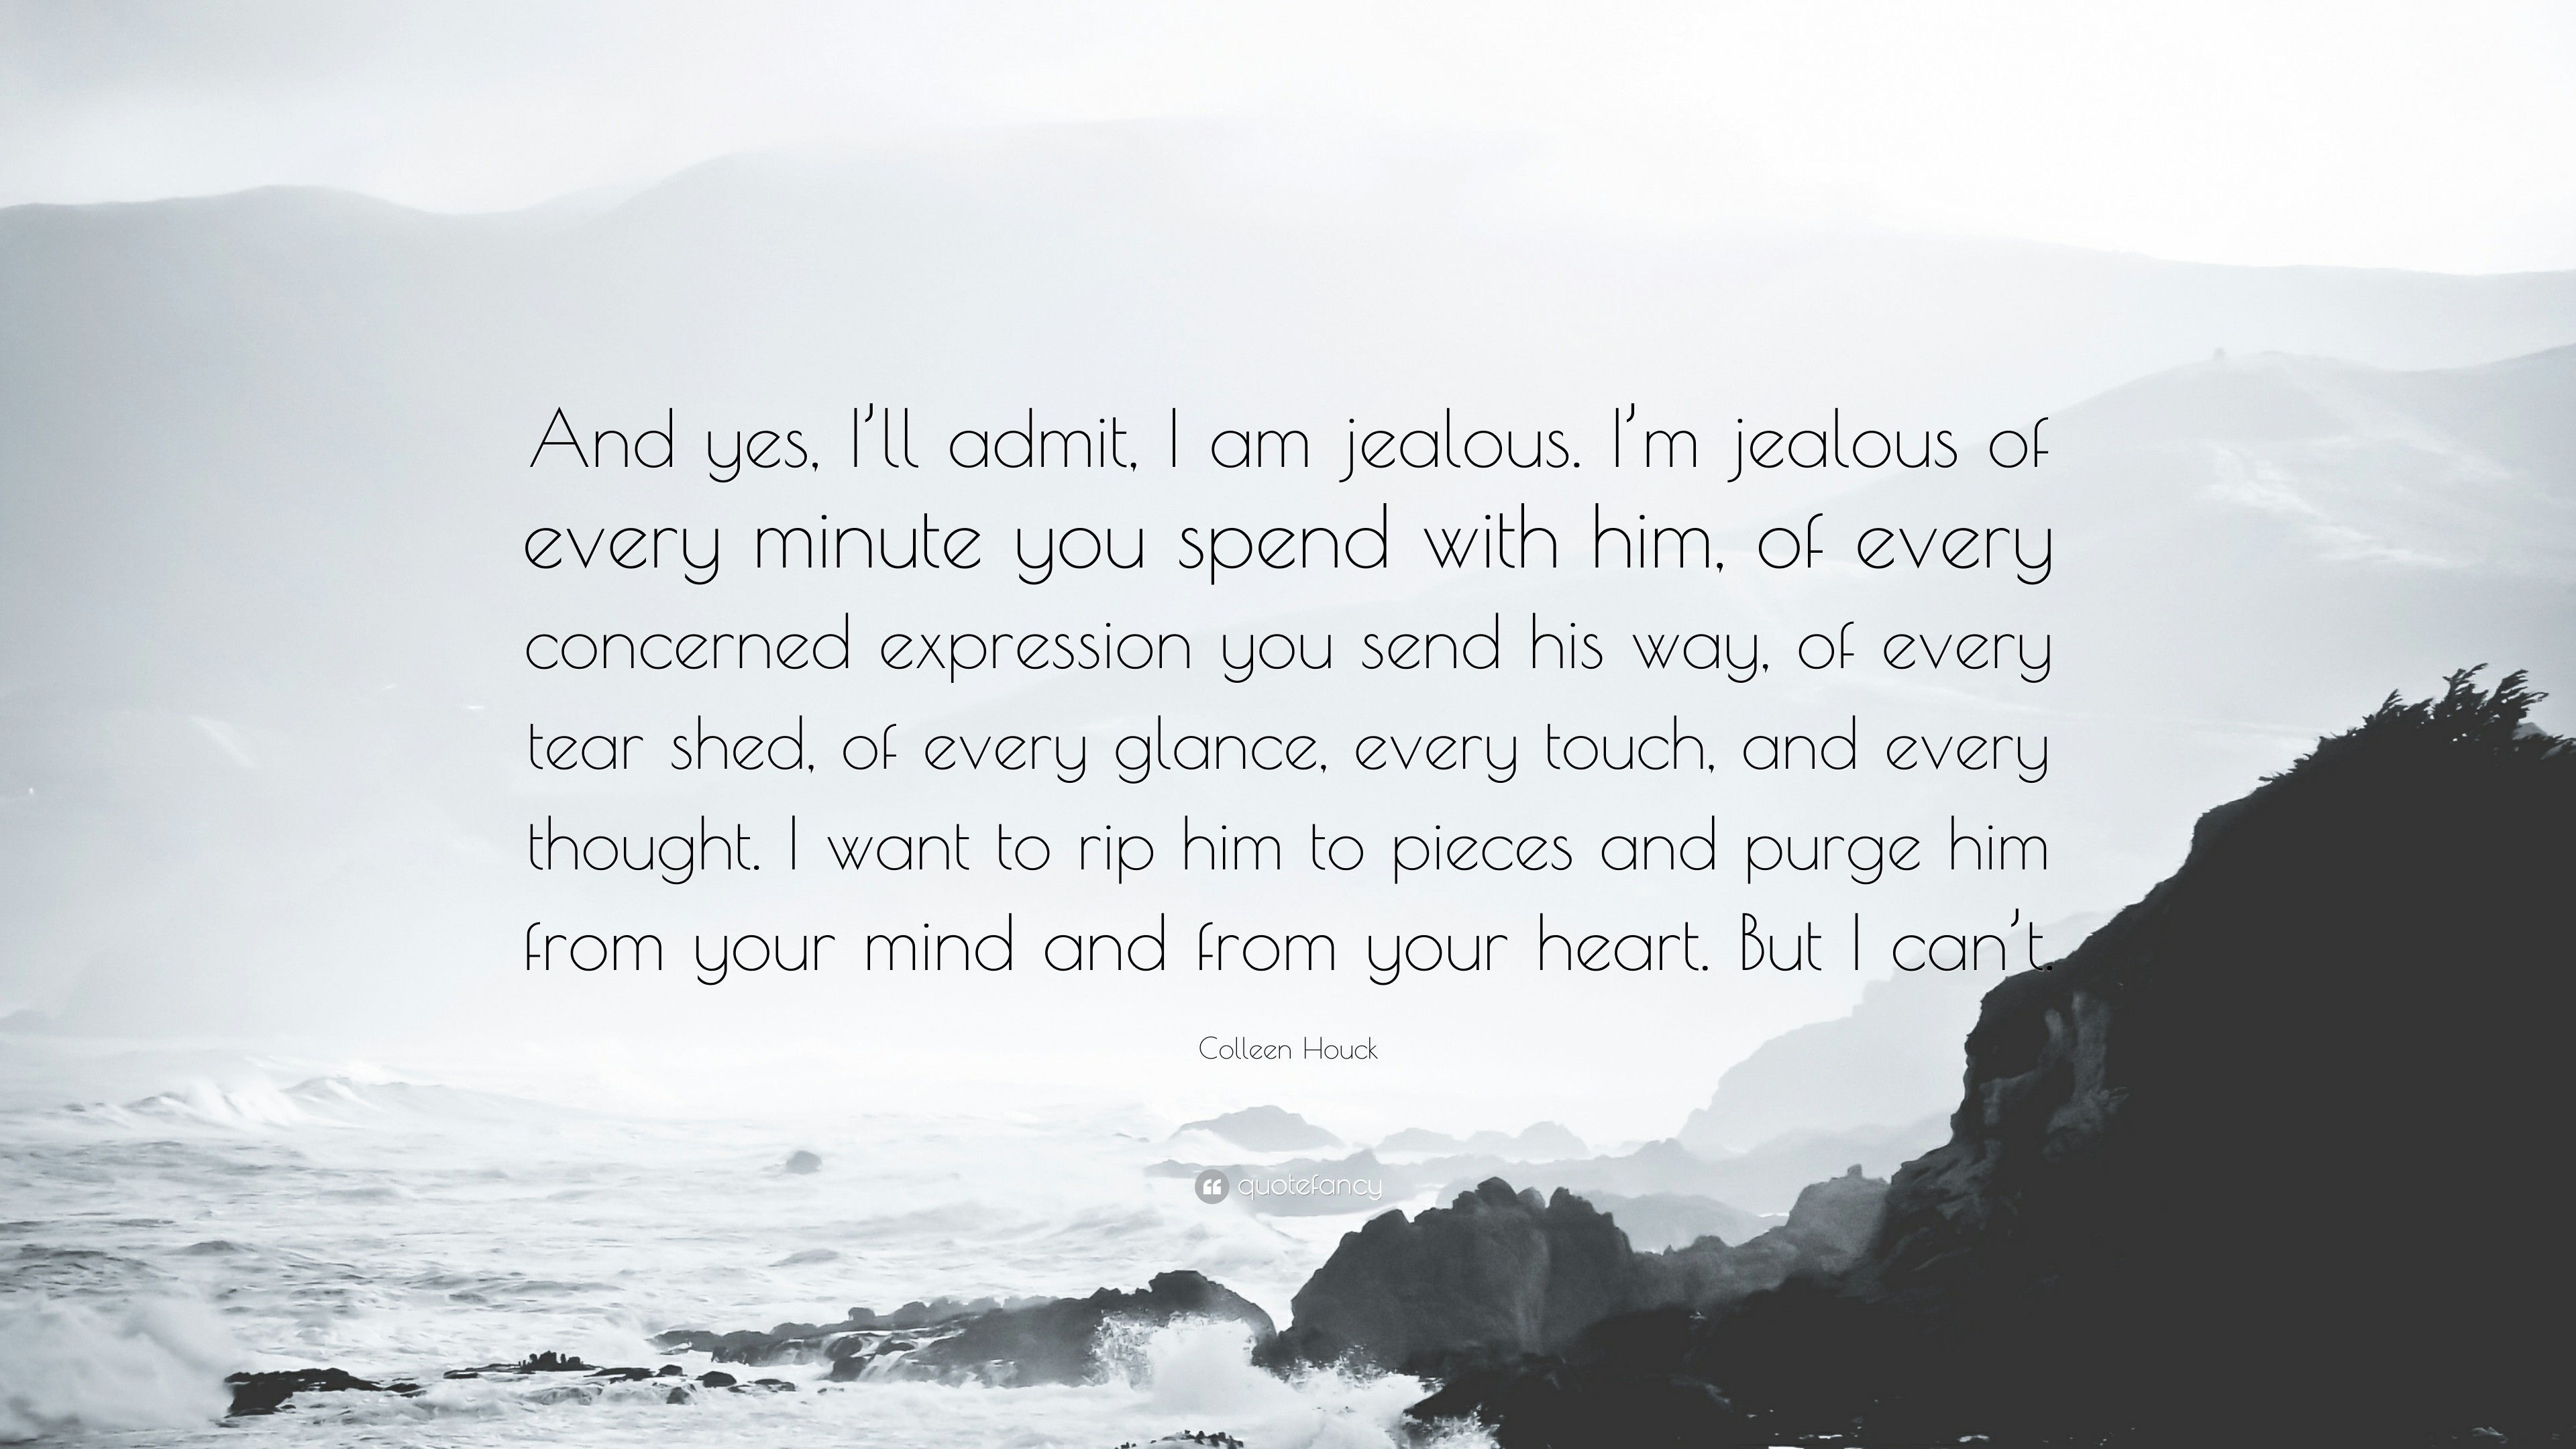 3840x2160 Colleen Houck Quote: “And yes, I'll admit, I am jealous